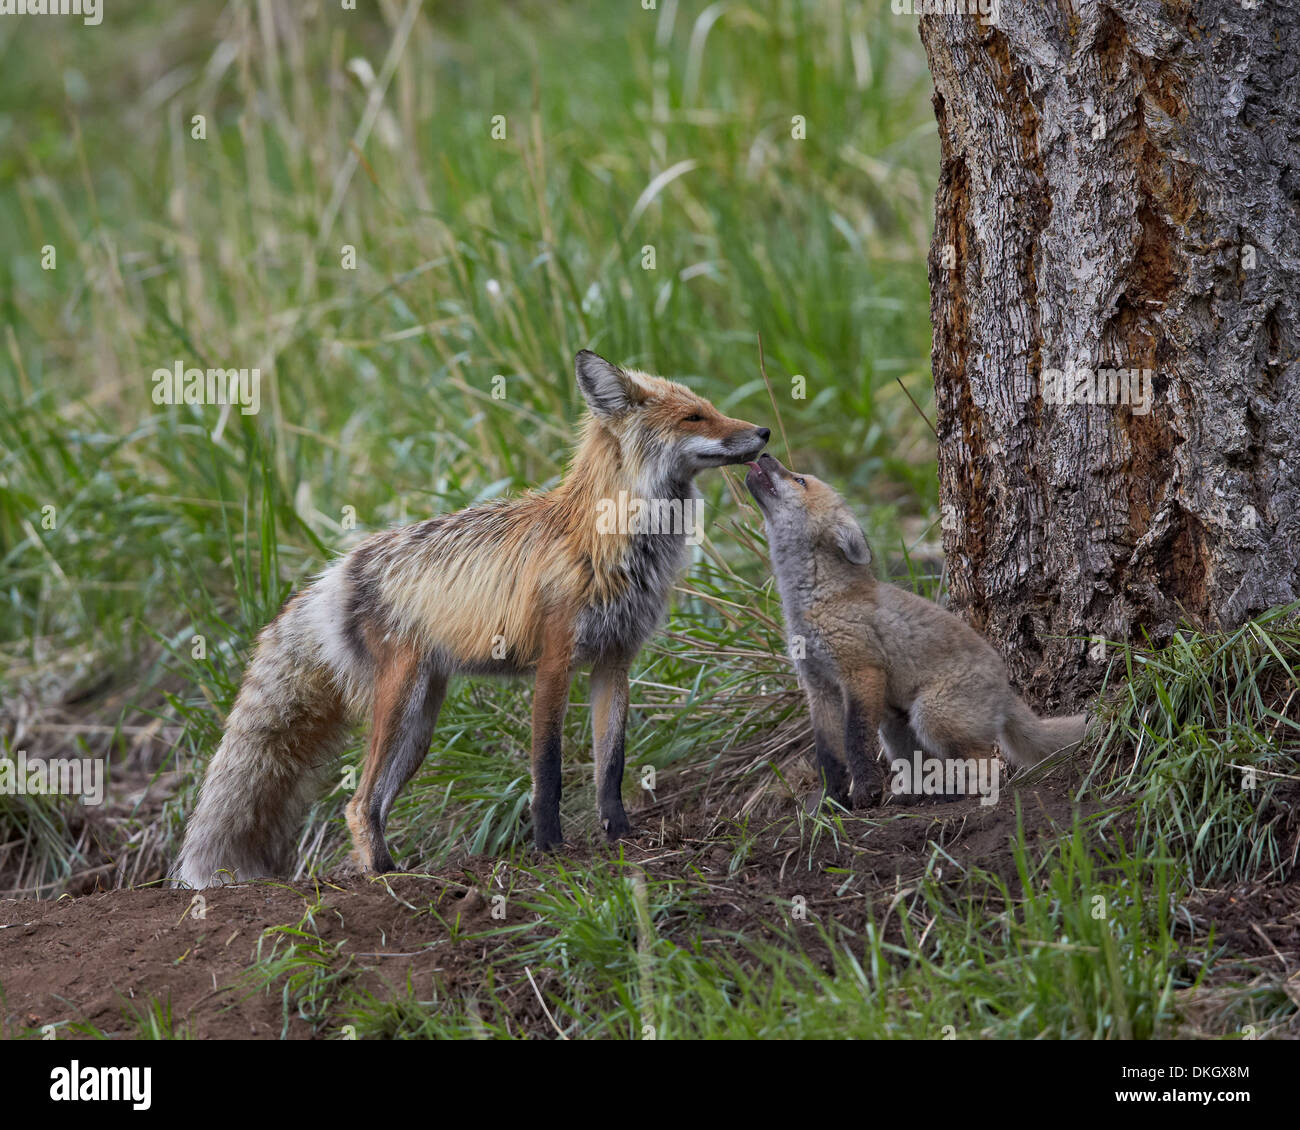 Red fox (Vulpes vulpes) (Vulpes fulva) kit licking its father's mouth, Yellowstone National Park, Wyoming, USA Stock Photo